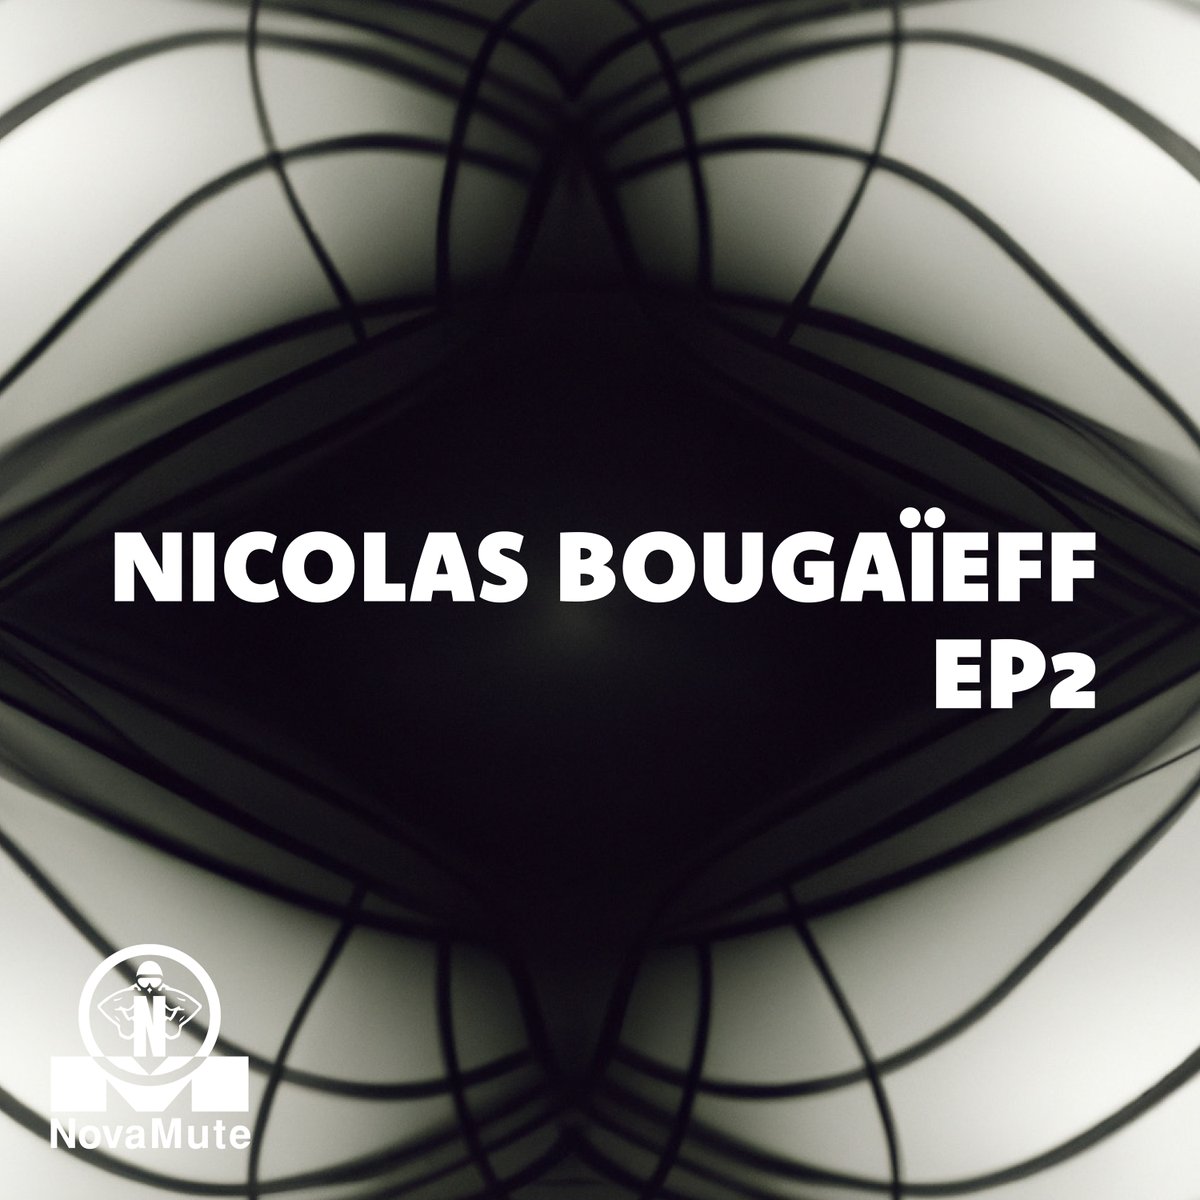 Shadow Plot, taken from @nbougaieff EP2, available now exclusively on @Beatport: mute.ffm.to/nb-ep2